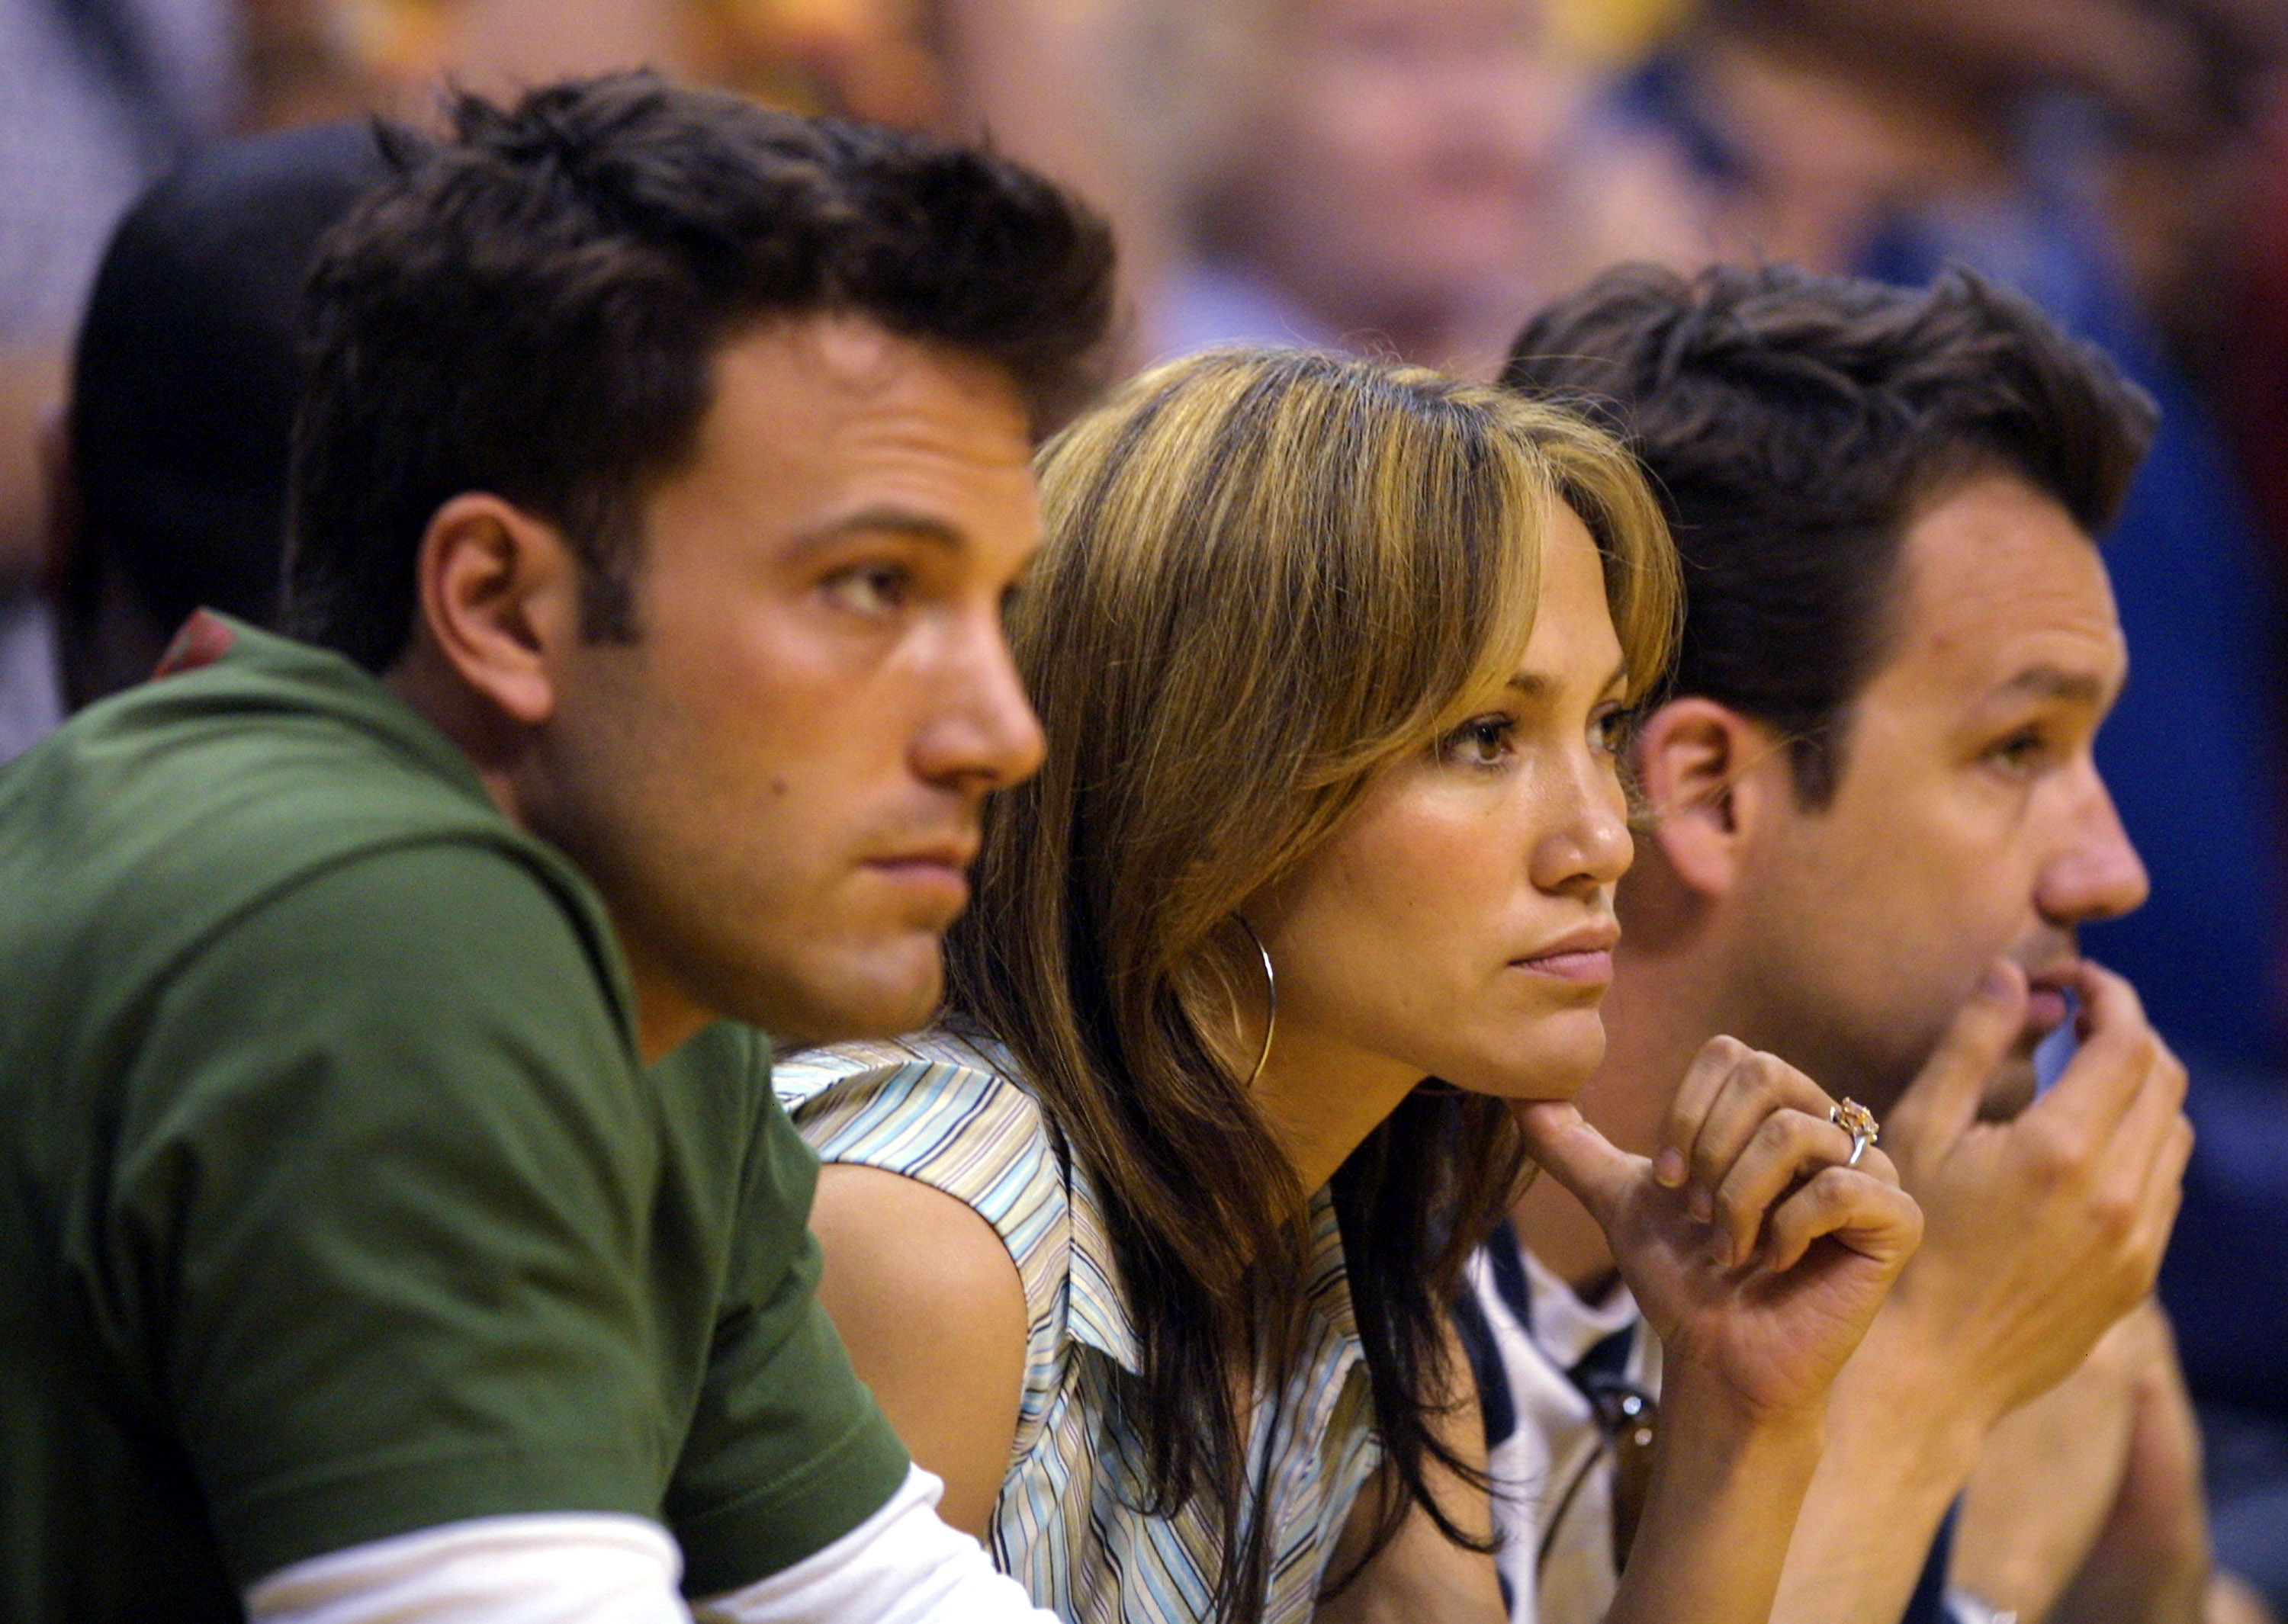 Ben and J.Lo at a sporting event